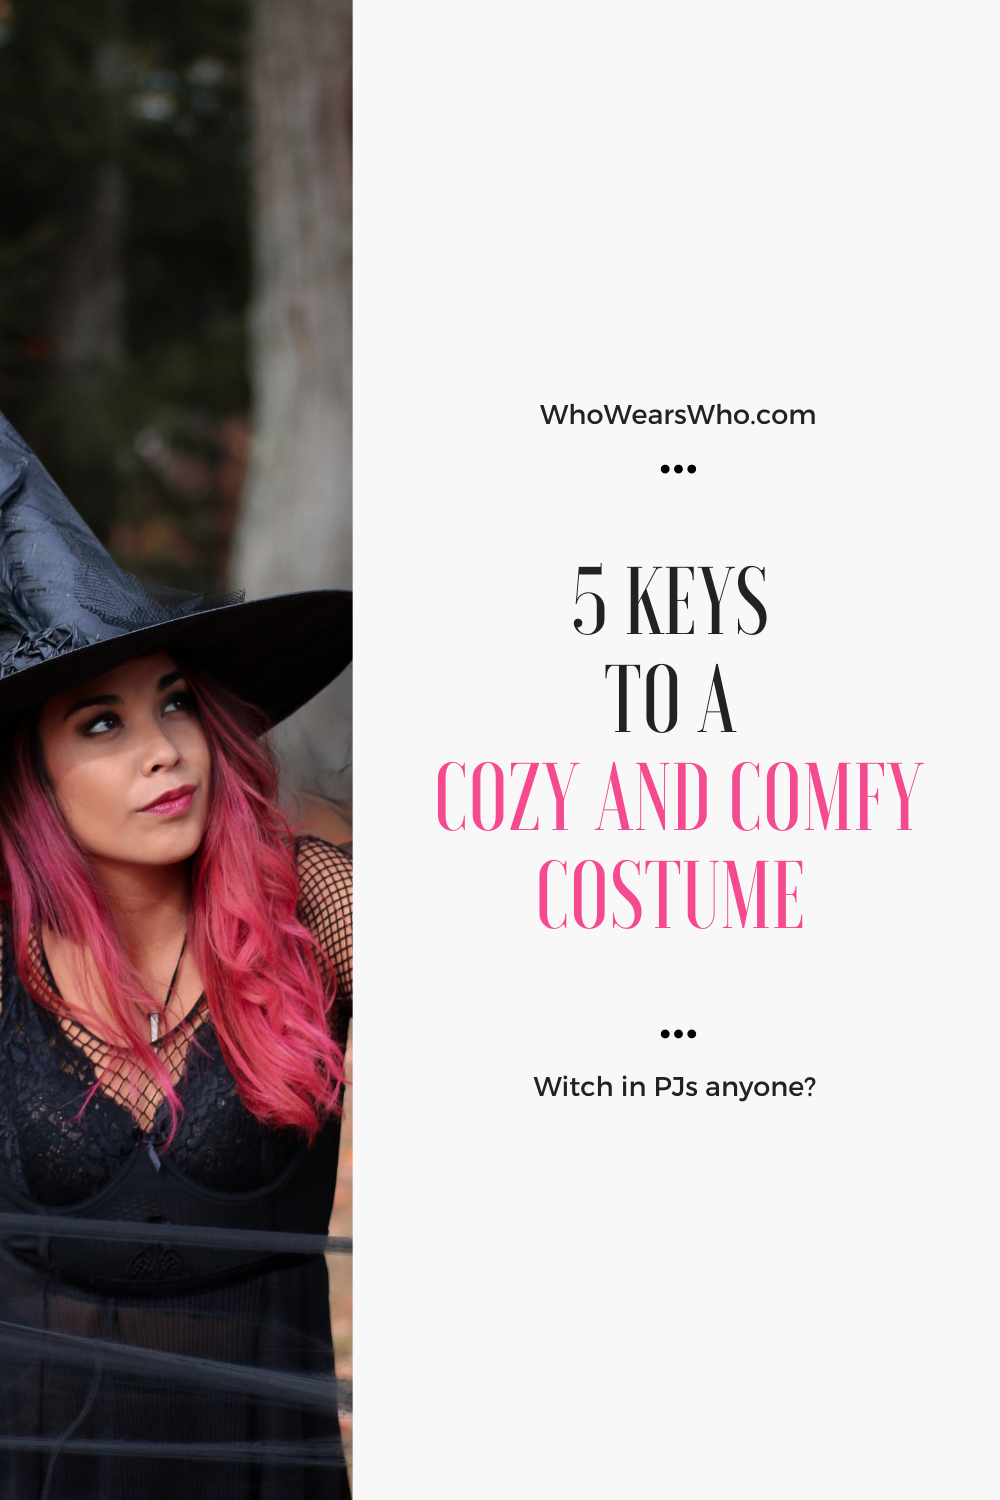 5 Keys to a Cozy and Comfy Costume